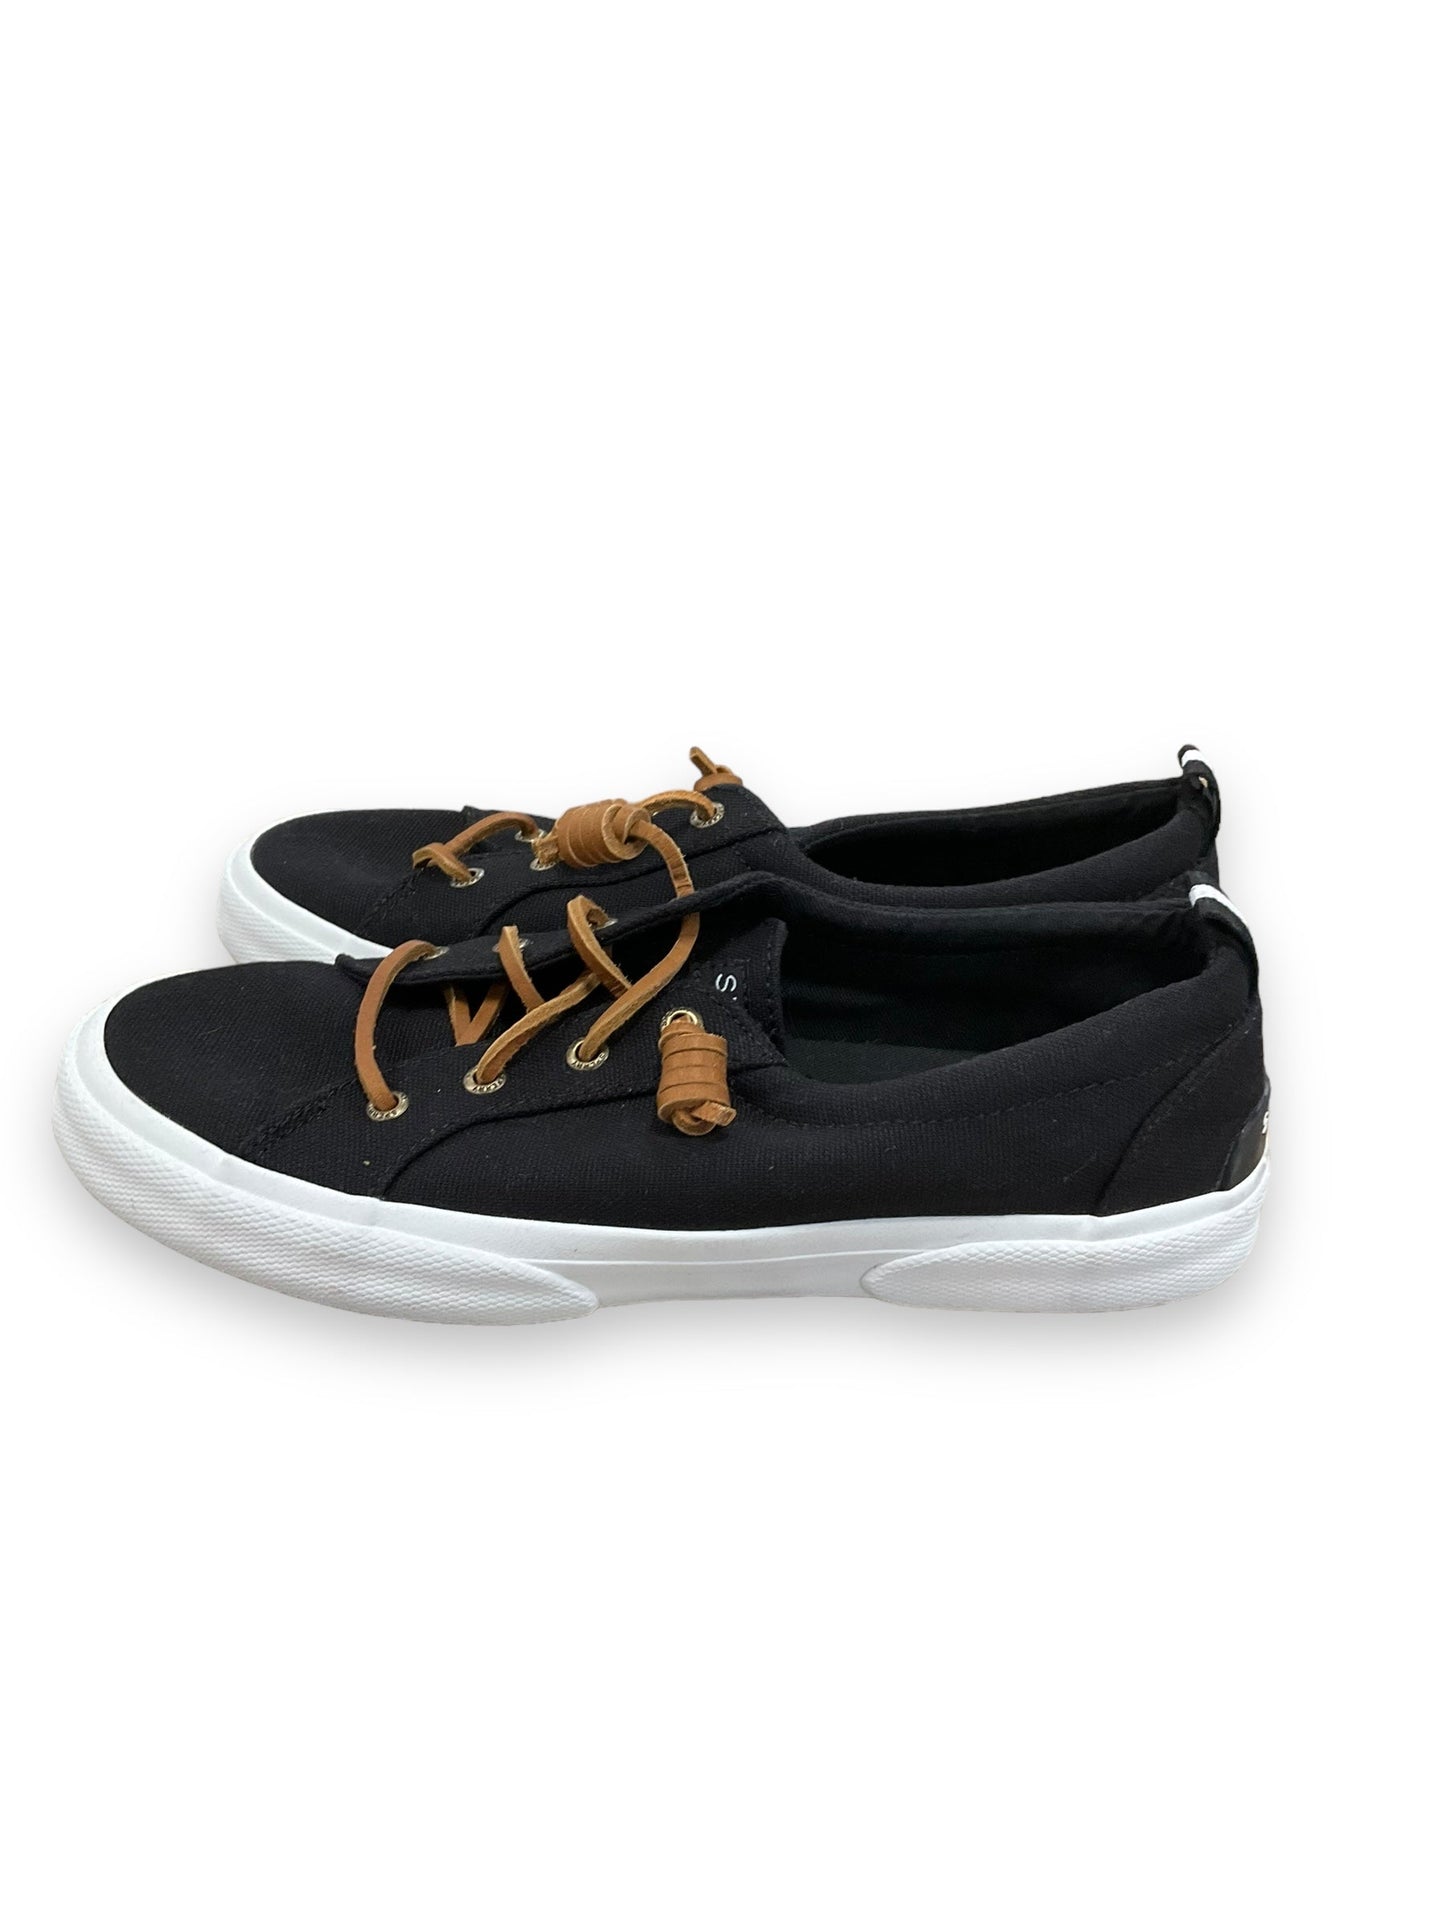 Black Shoes Sneakers Sperry, Size 8